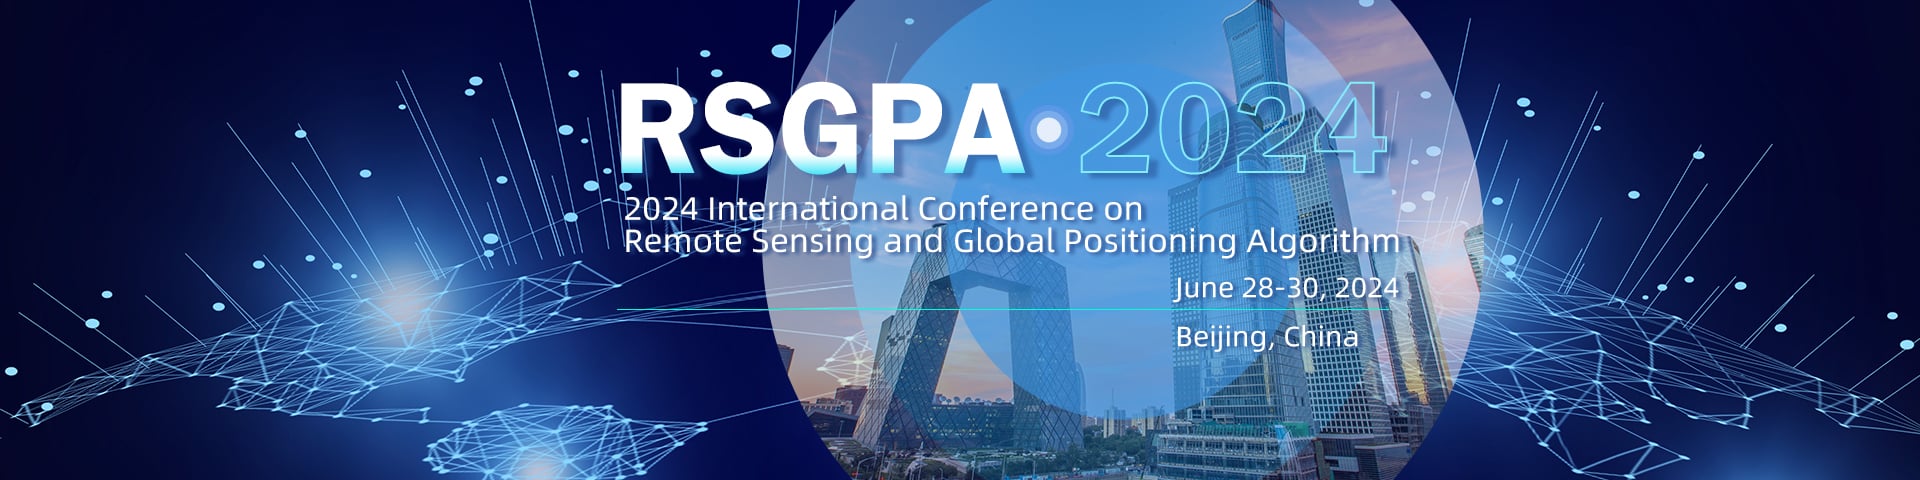 2024 International Conference on Remote Sensing and Global Positioning Algorithm (RSGPA 2024)